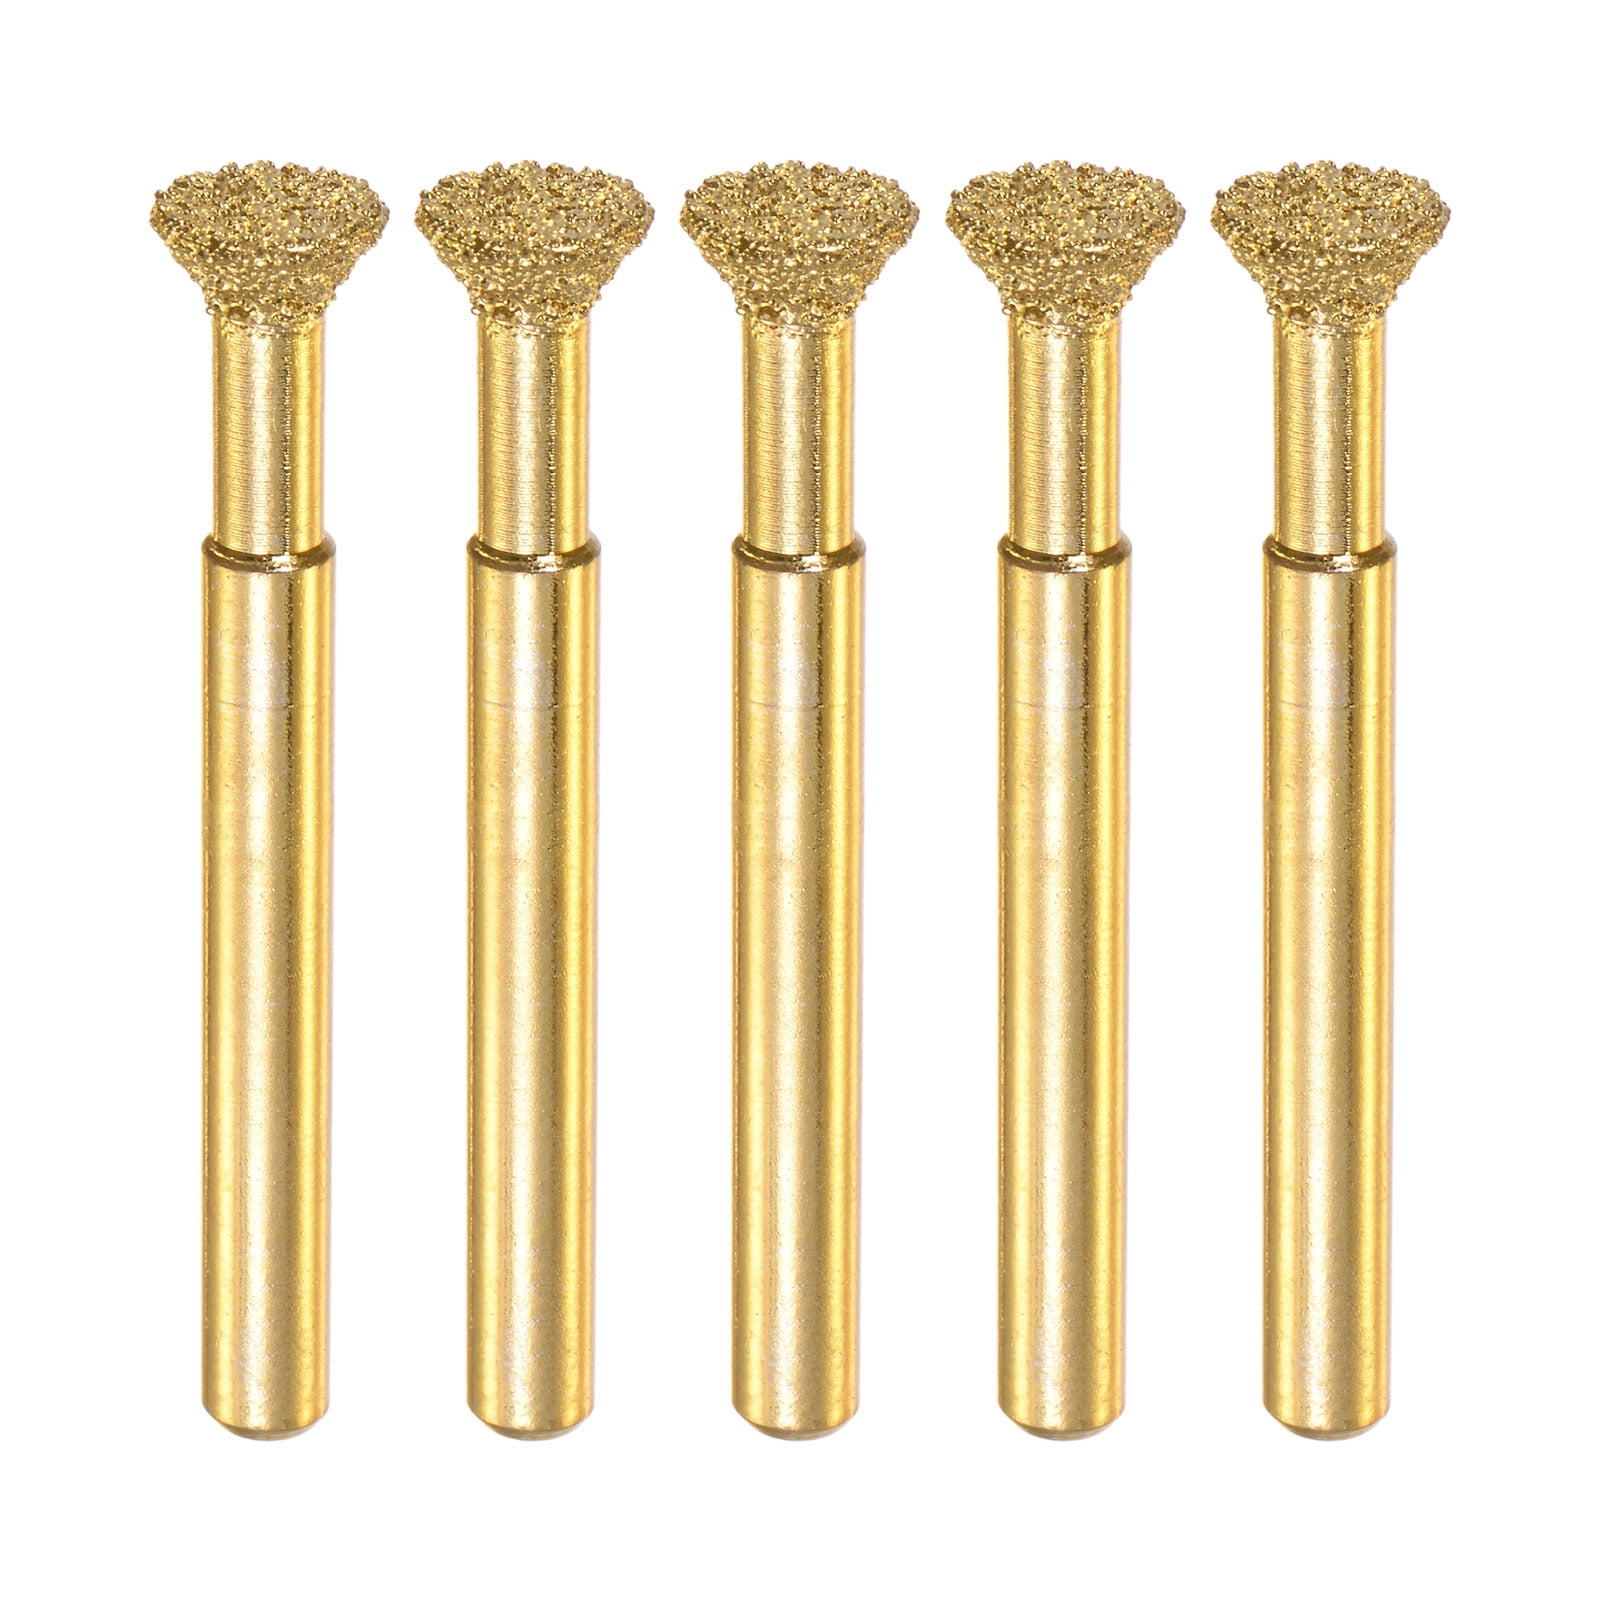 uxcell Diamond Burrs Bits Grinding Drill Carving Rotary Tool for Glass Stone Ceramic 120 Grit 1/4 Shank 10mm Cylinder 5 Pcs 